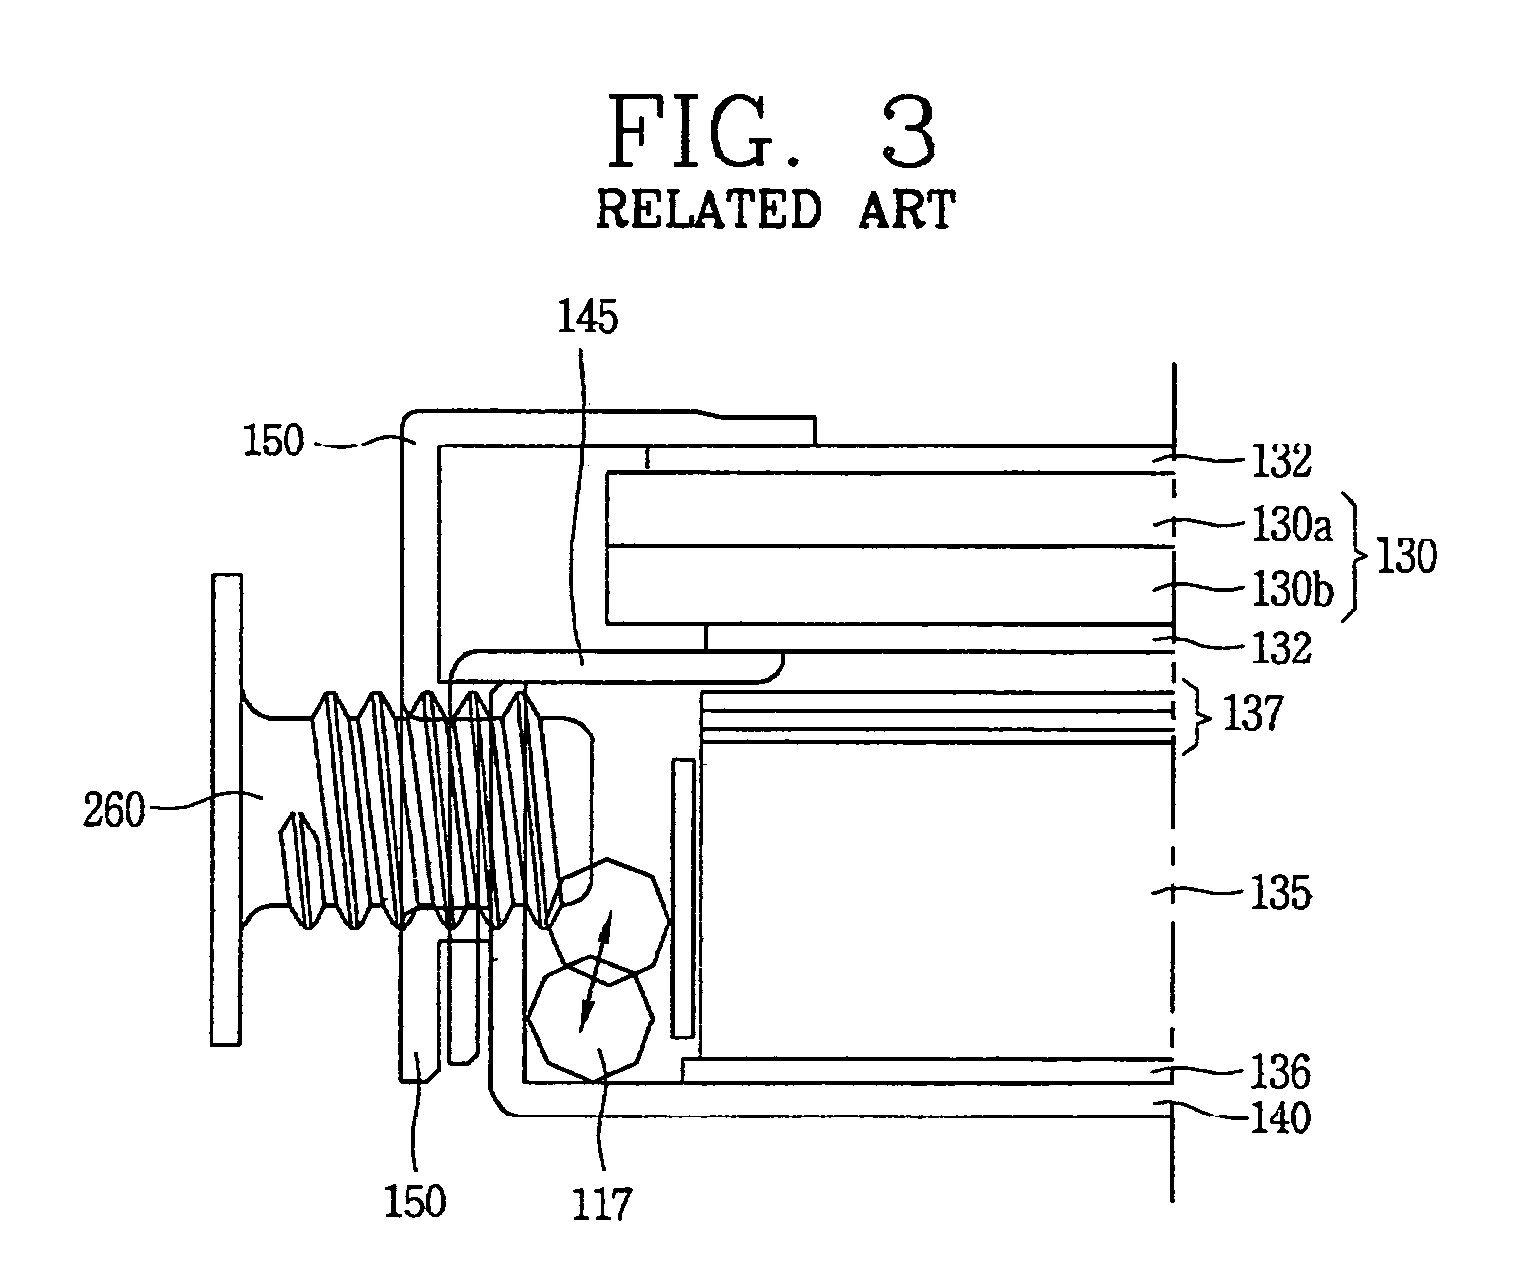 Liquid crystal display device comprising a protecting unit for enclosing a fastener and holding lamp wires